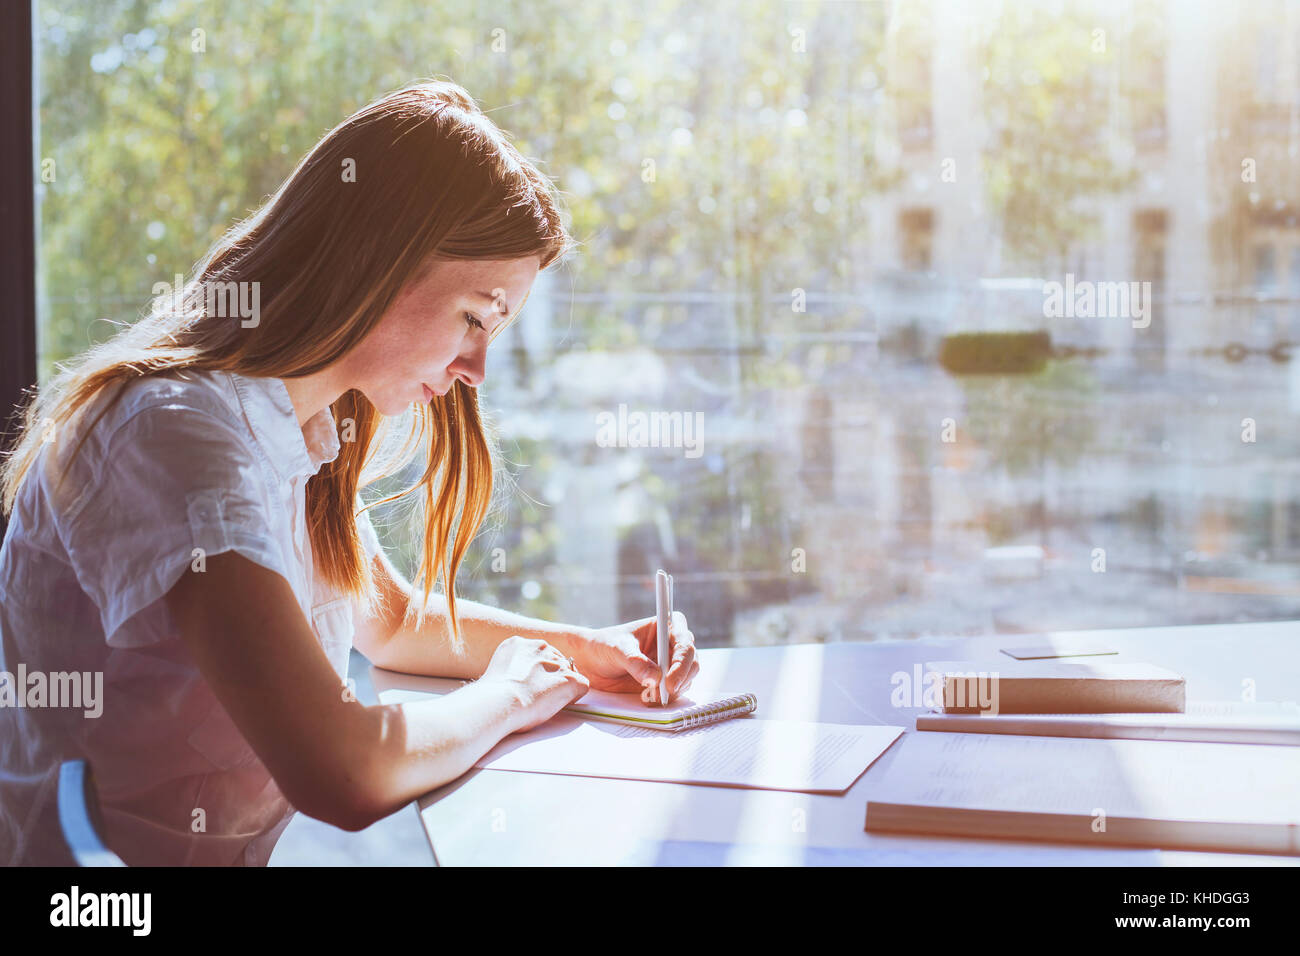 education, student girl in university during exam, young woman studying, people writing test Stock Photo